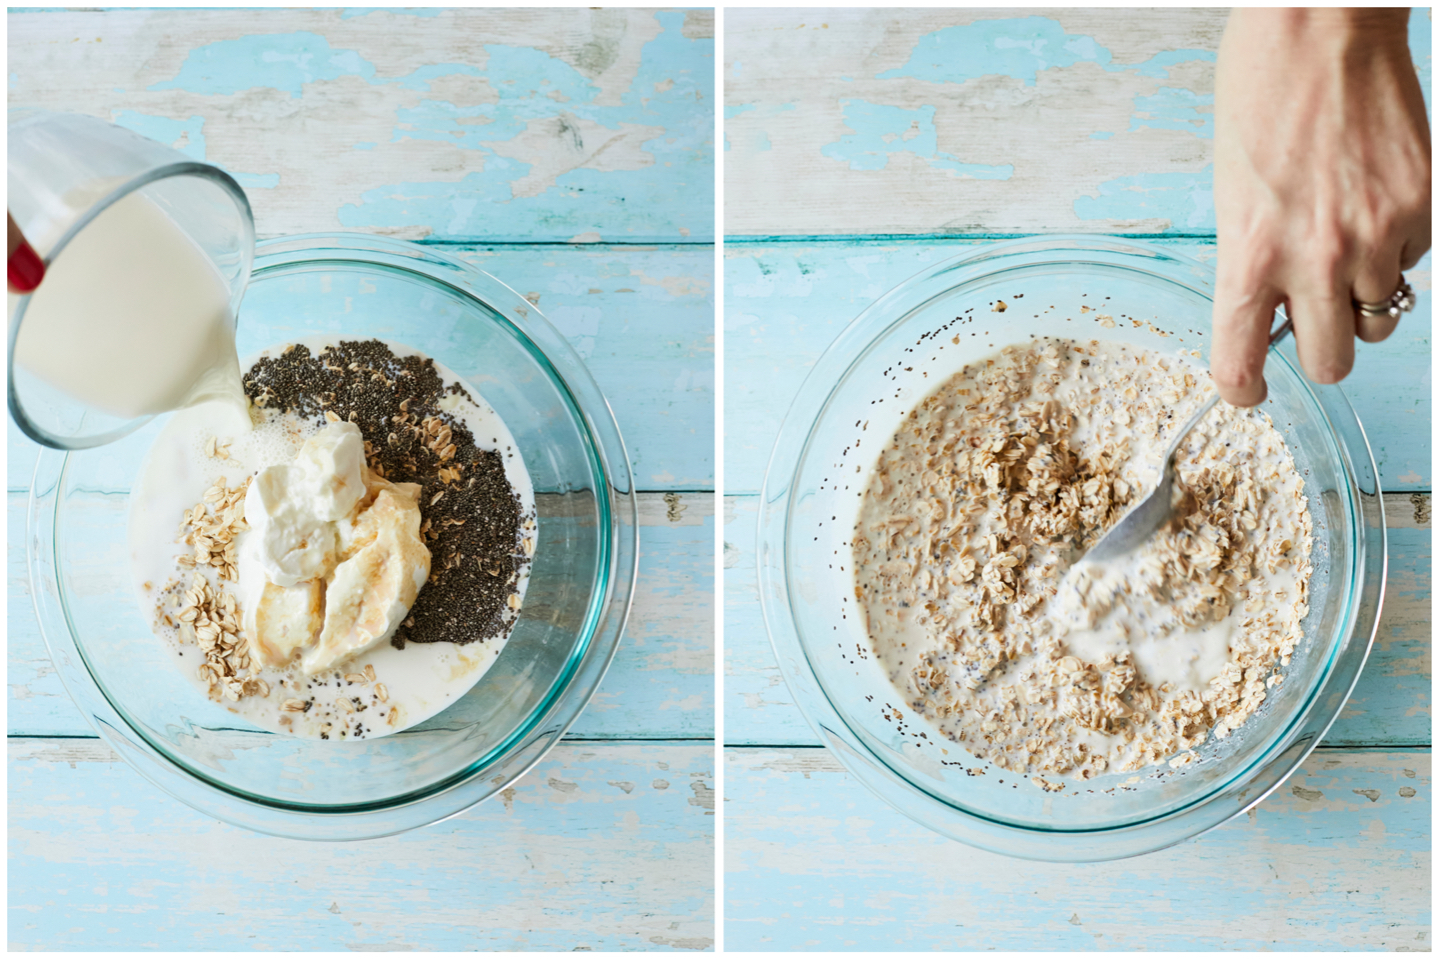 Two photos of the overnight oats ingredients in glass bowls - the oats, chia seeds, bananas, and milk unmixed on the left, and all of the ingredients mixed together on the right.